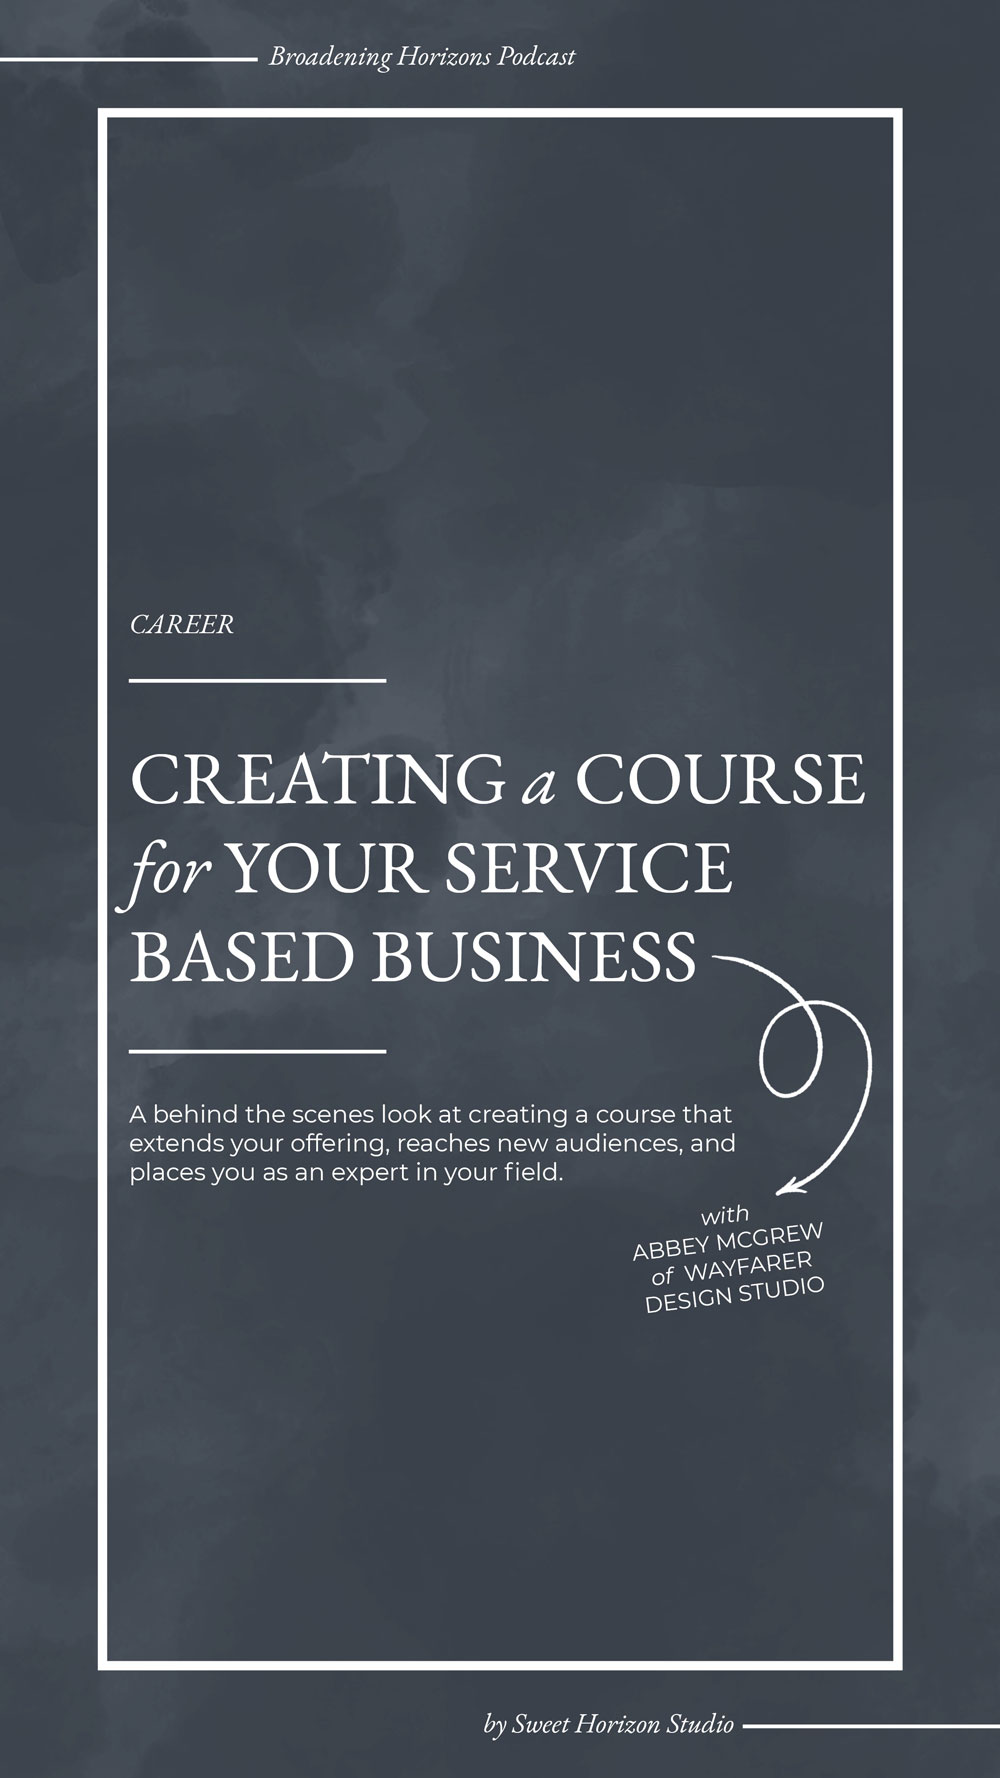 Creating a Course for Your Service Based Business Interview with Wayfarer Design Studio from www.sweethorizonblog.com